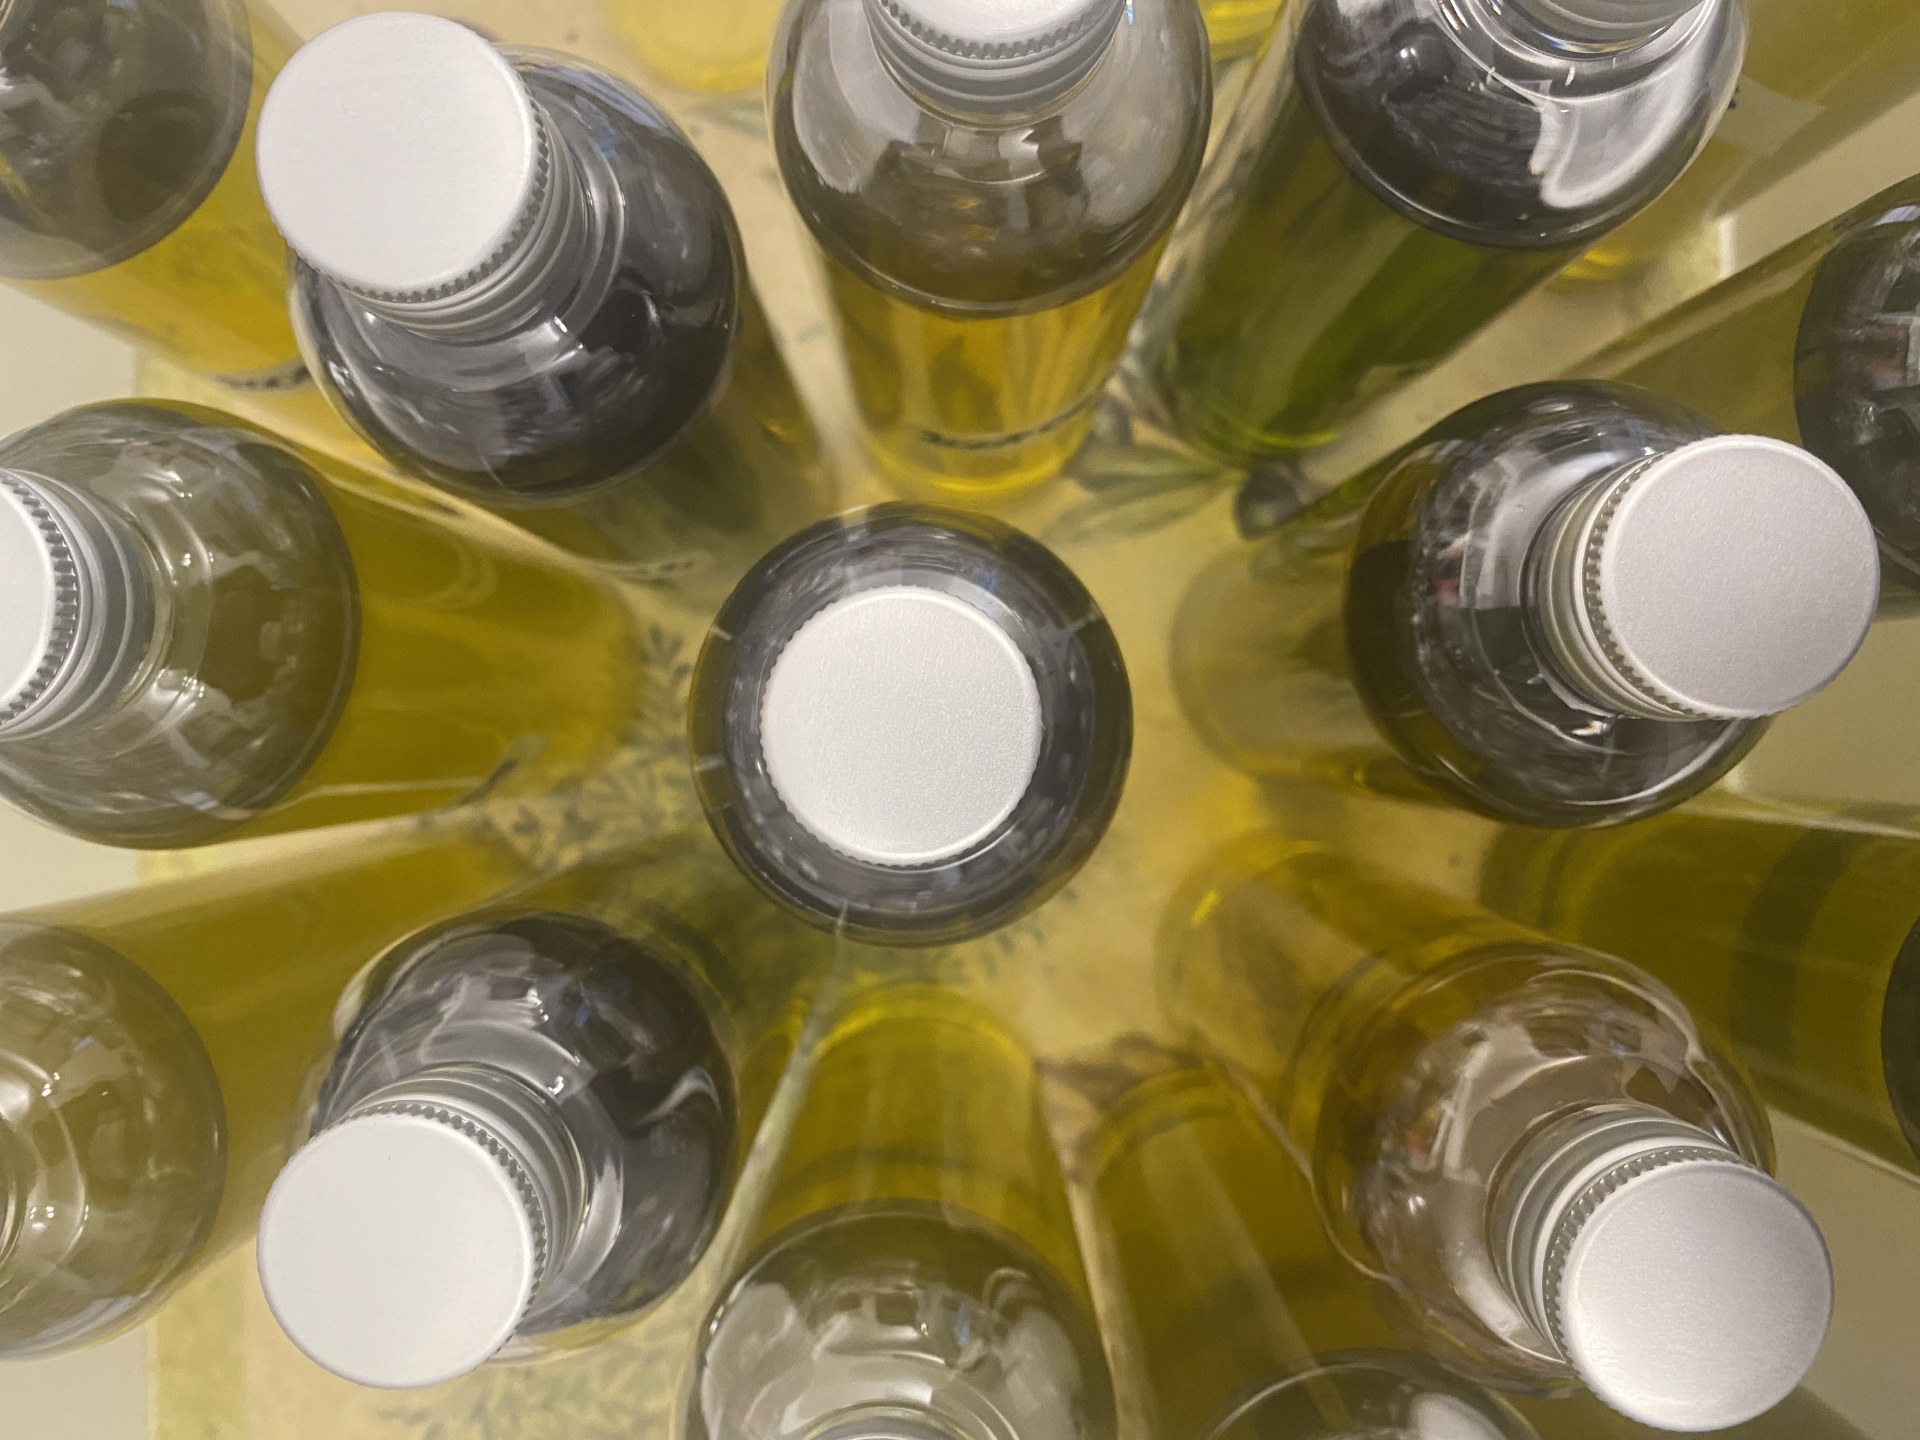 Olive Oil stocked in Italy. Update of 28 March 2021